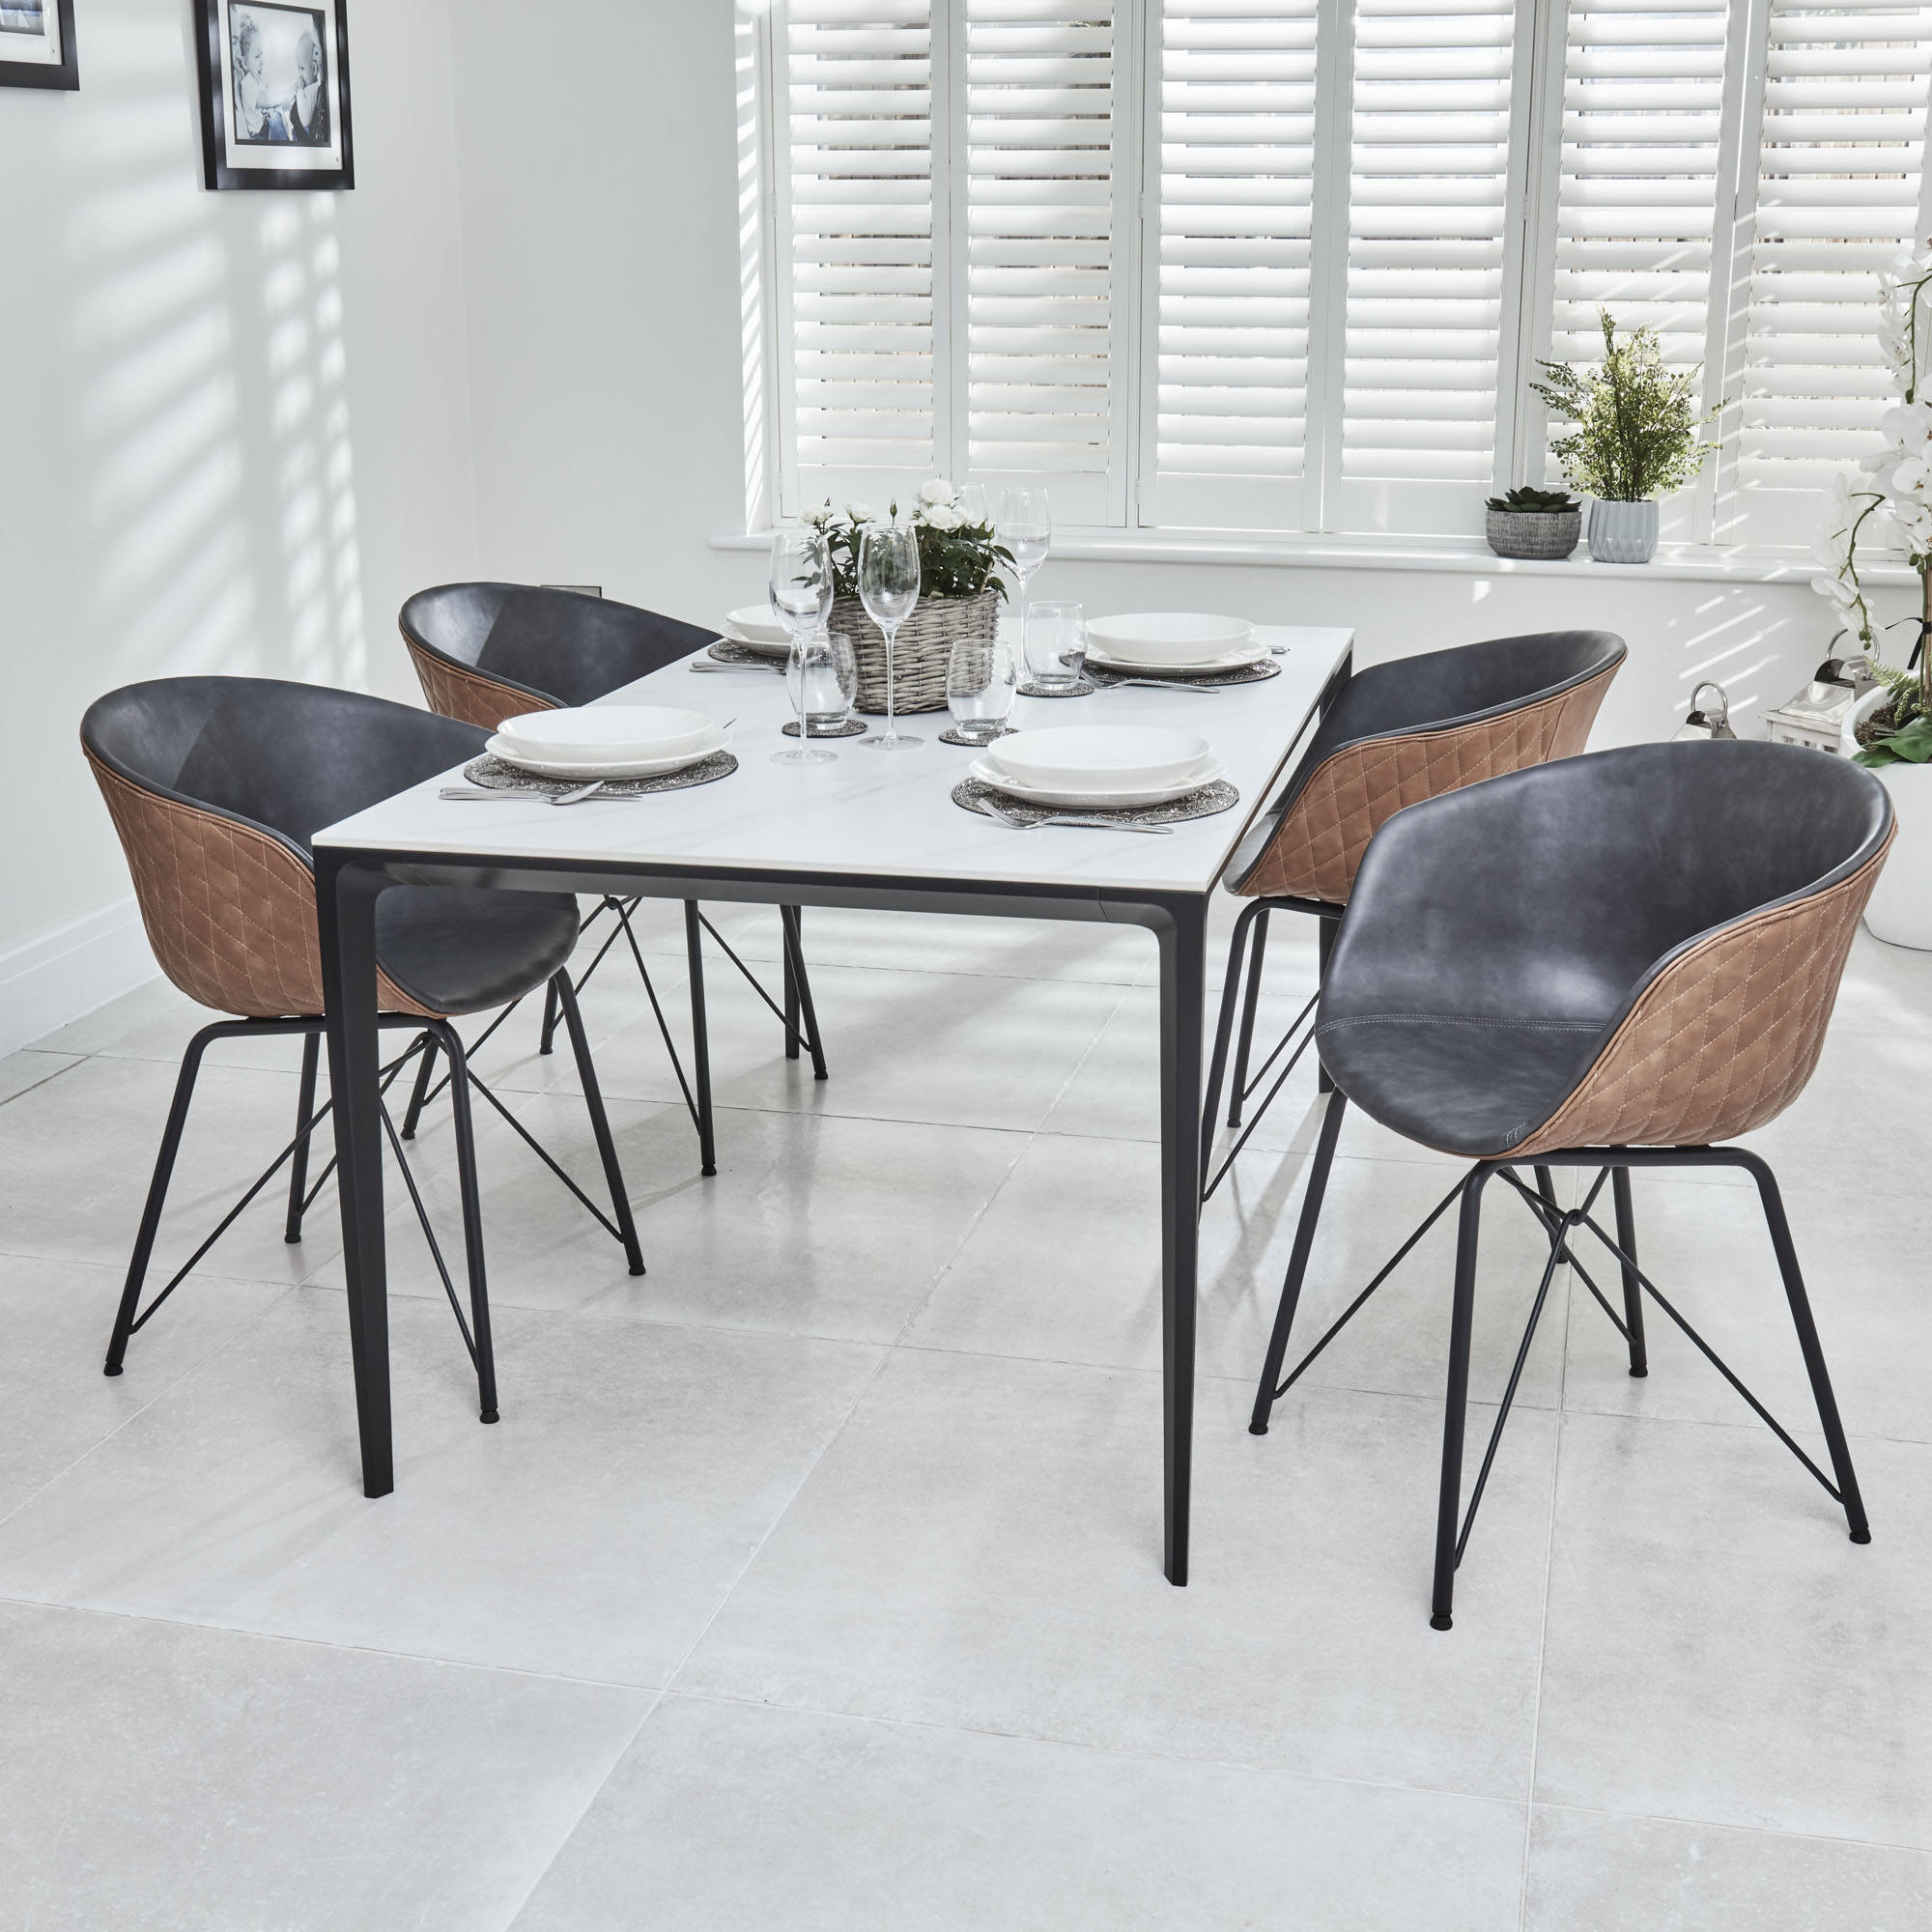 Bellagio 1.6M White Sintered Stone Dining Table Set with 4x Camila Grey/Tan Dining Chairs